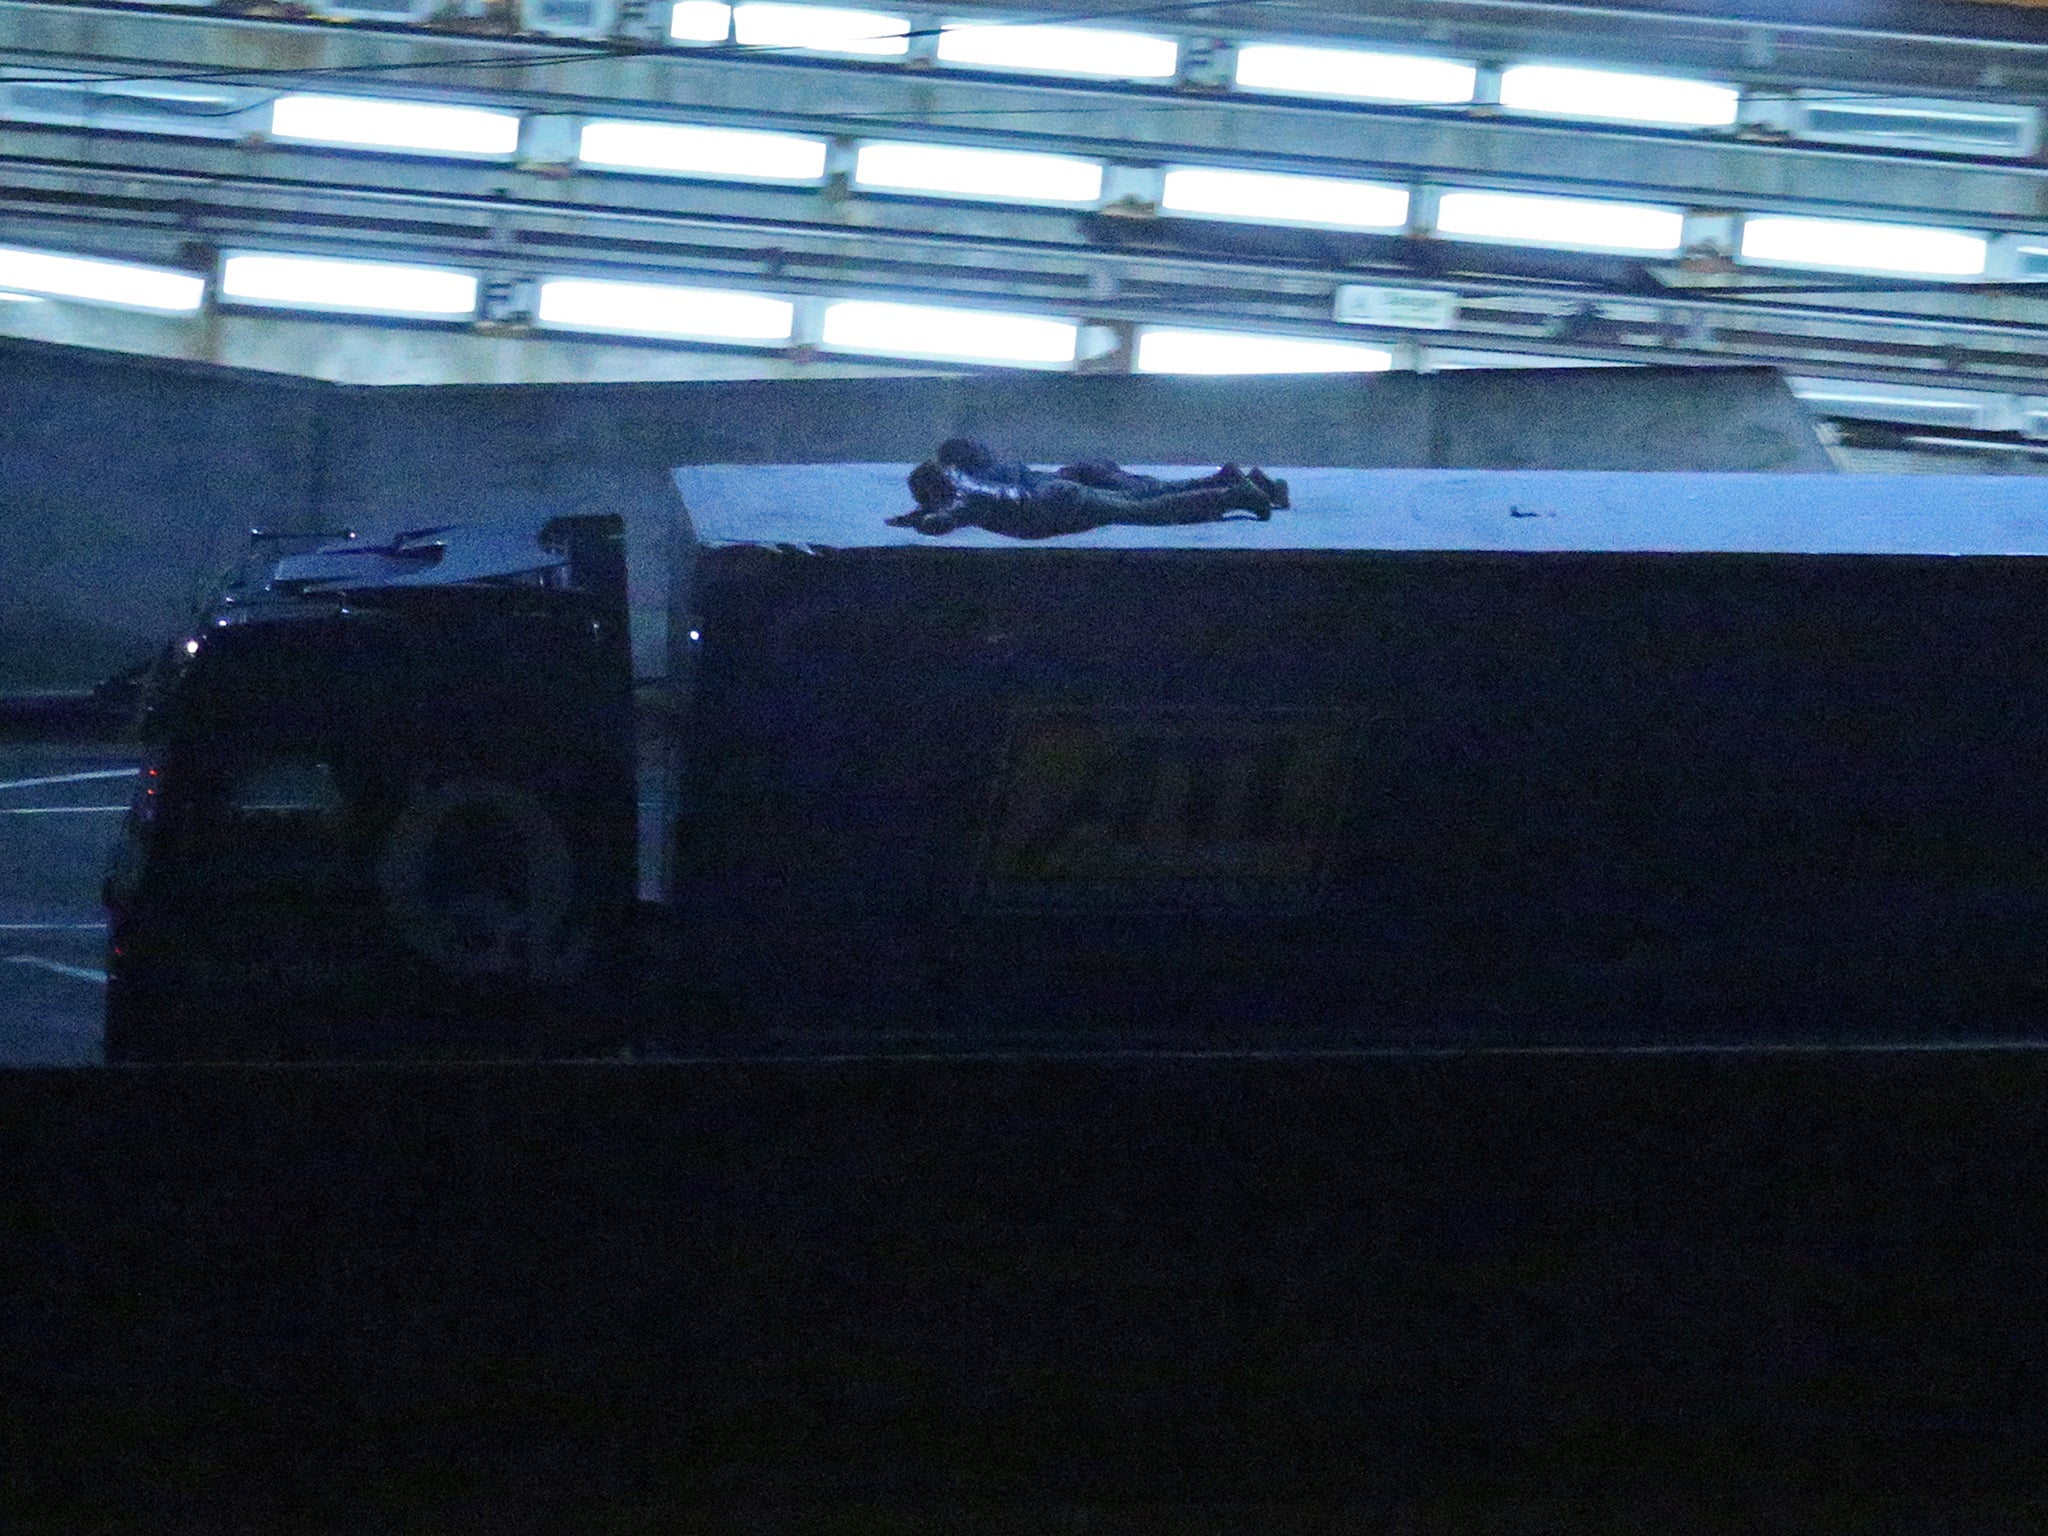 Two migrants cling to the roof of a freight truck as it leaves the Eurotunnel terminal in Folkestone